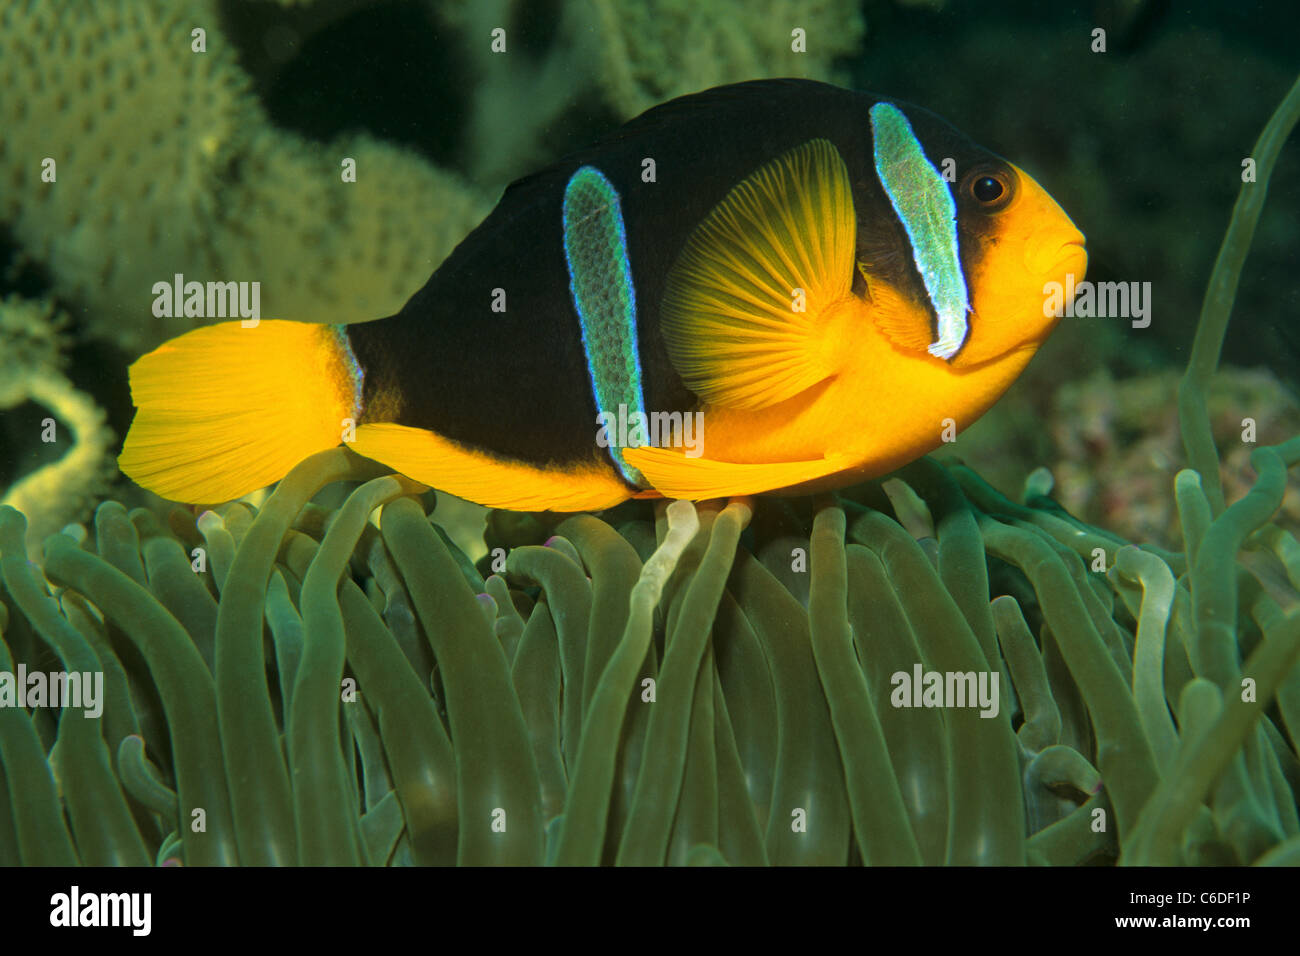 Anemonenfisch, Amphiprion sp.,, Anemonefish Amphiprion sp., Foto Stock